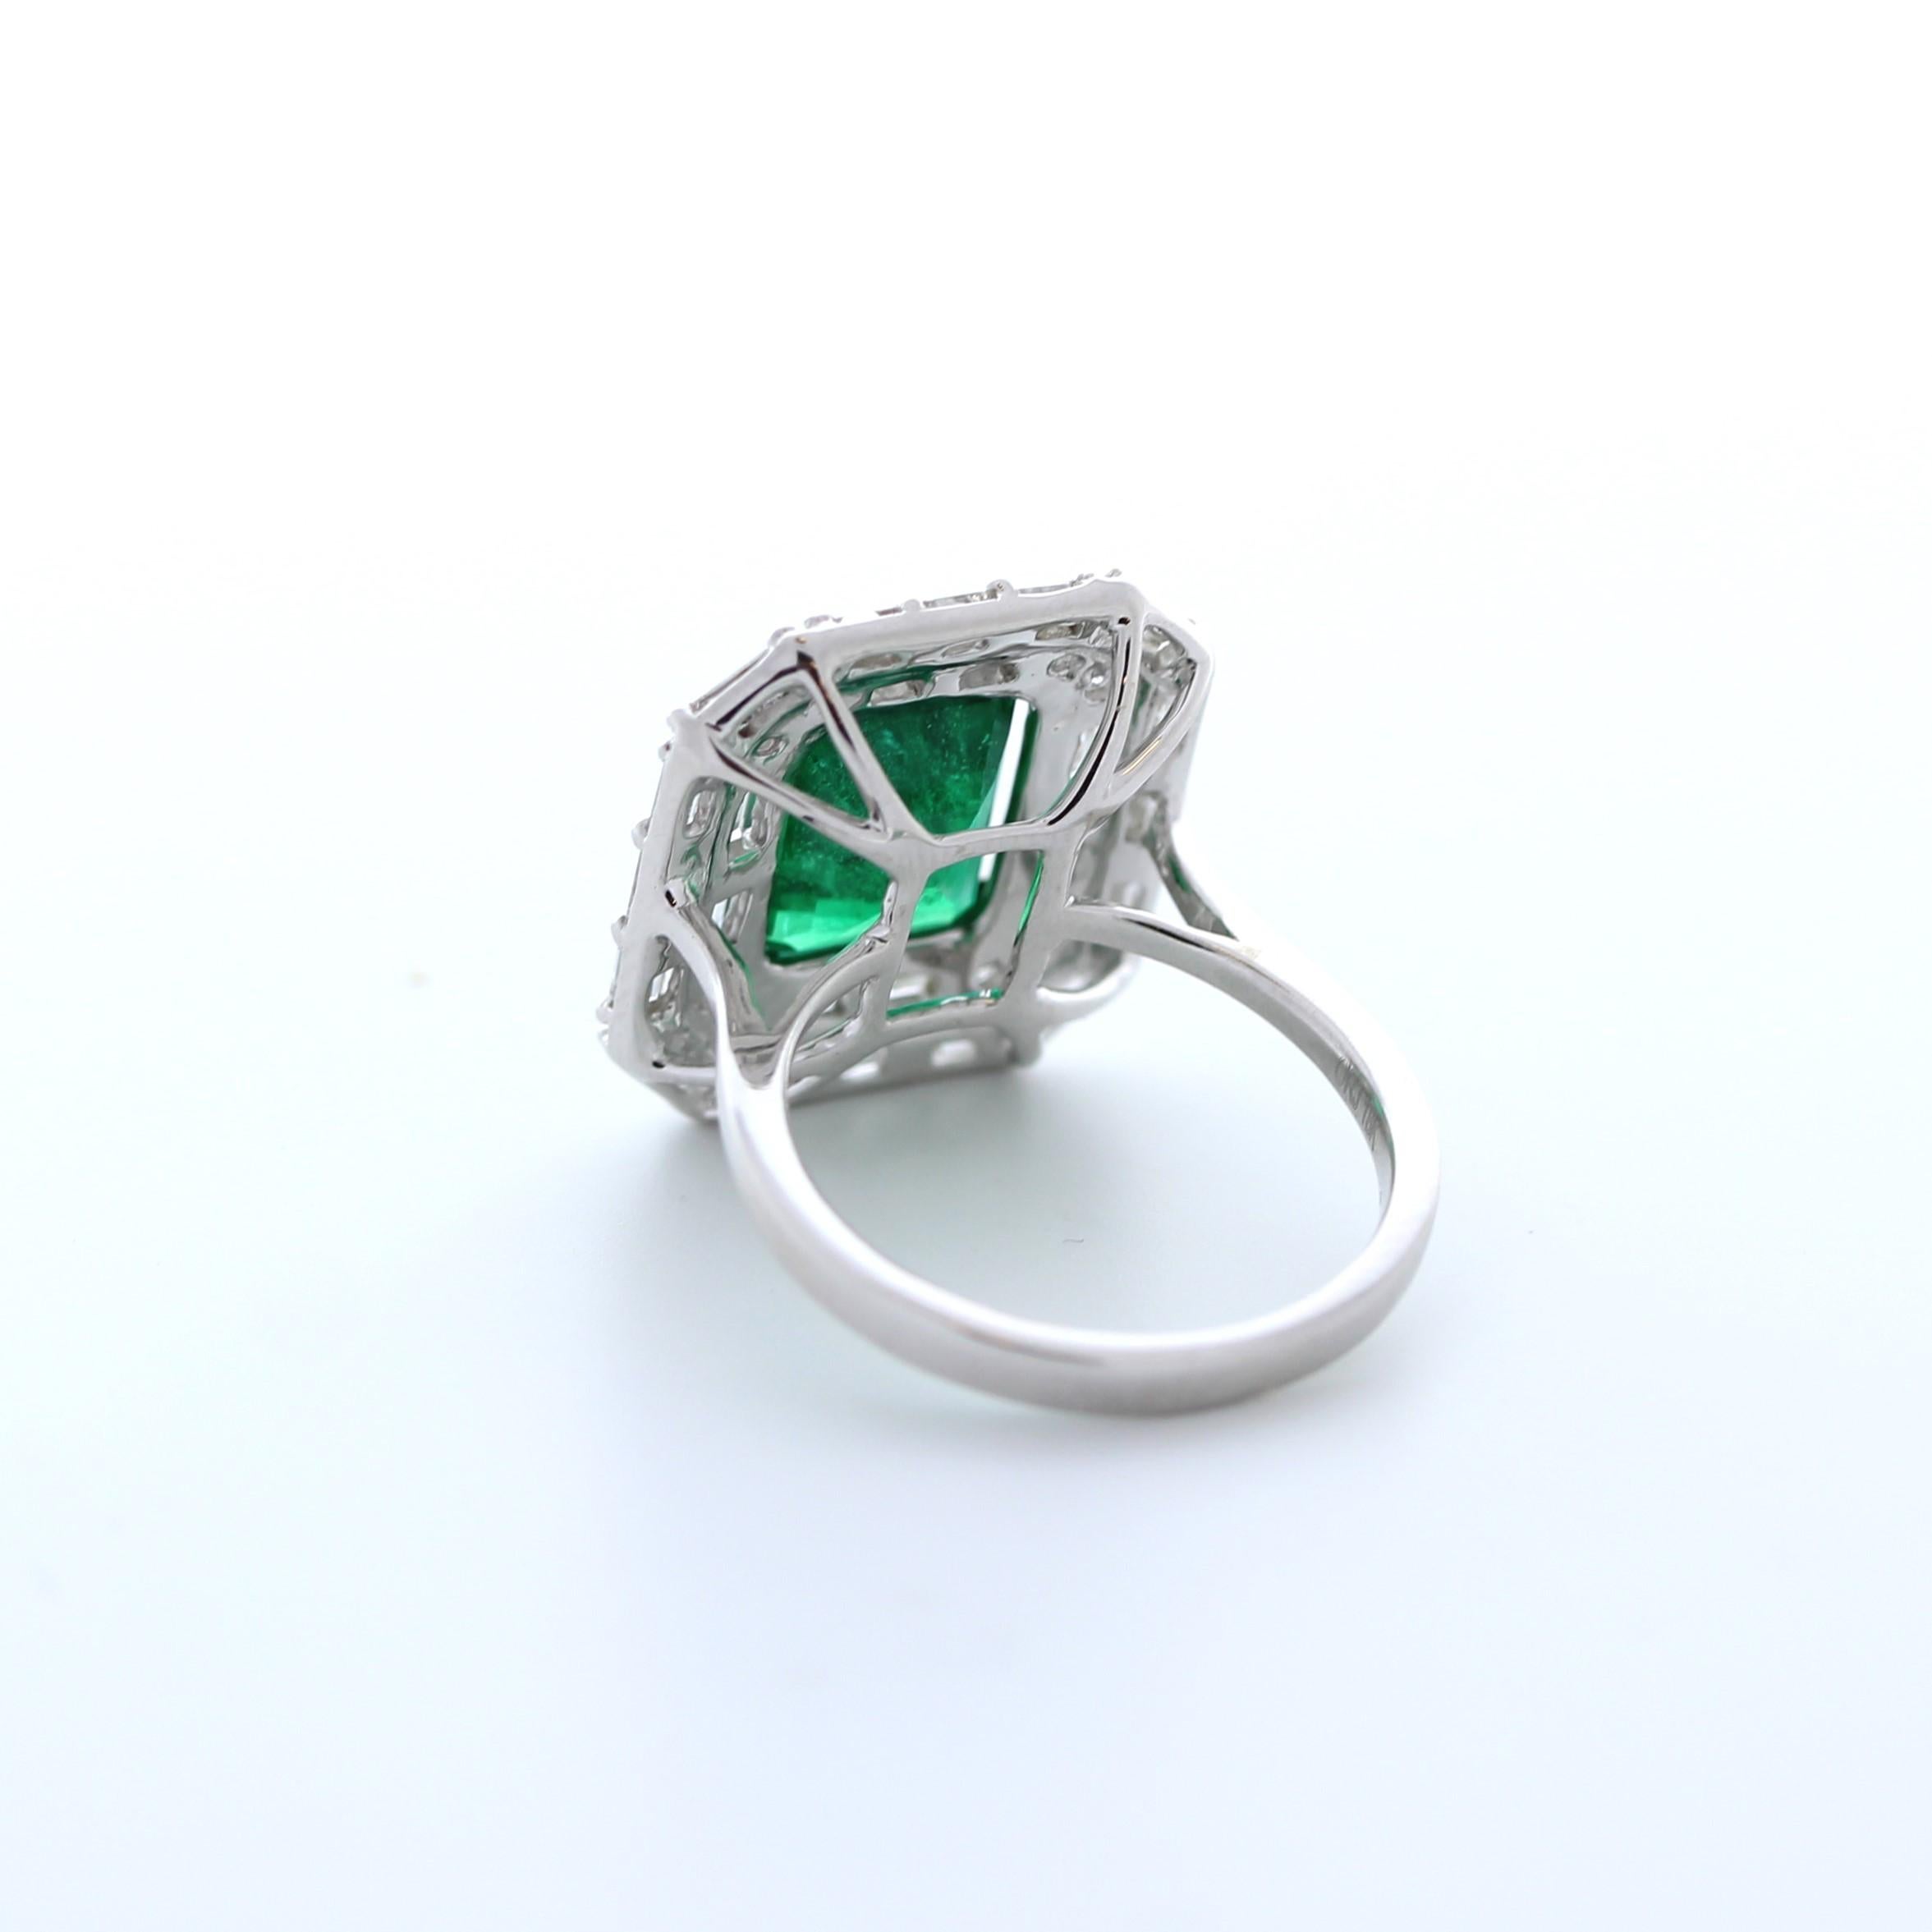 Contemporary 3.37 Carat Weight Green Emerald & Baguette Diamond Fashion Ring in 18k W. Gold For Sale